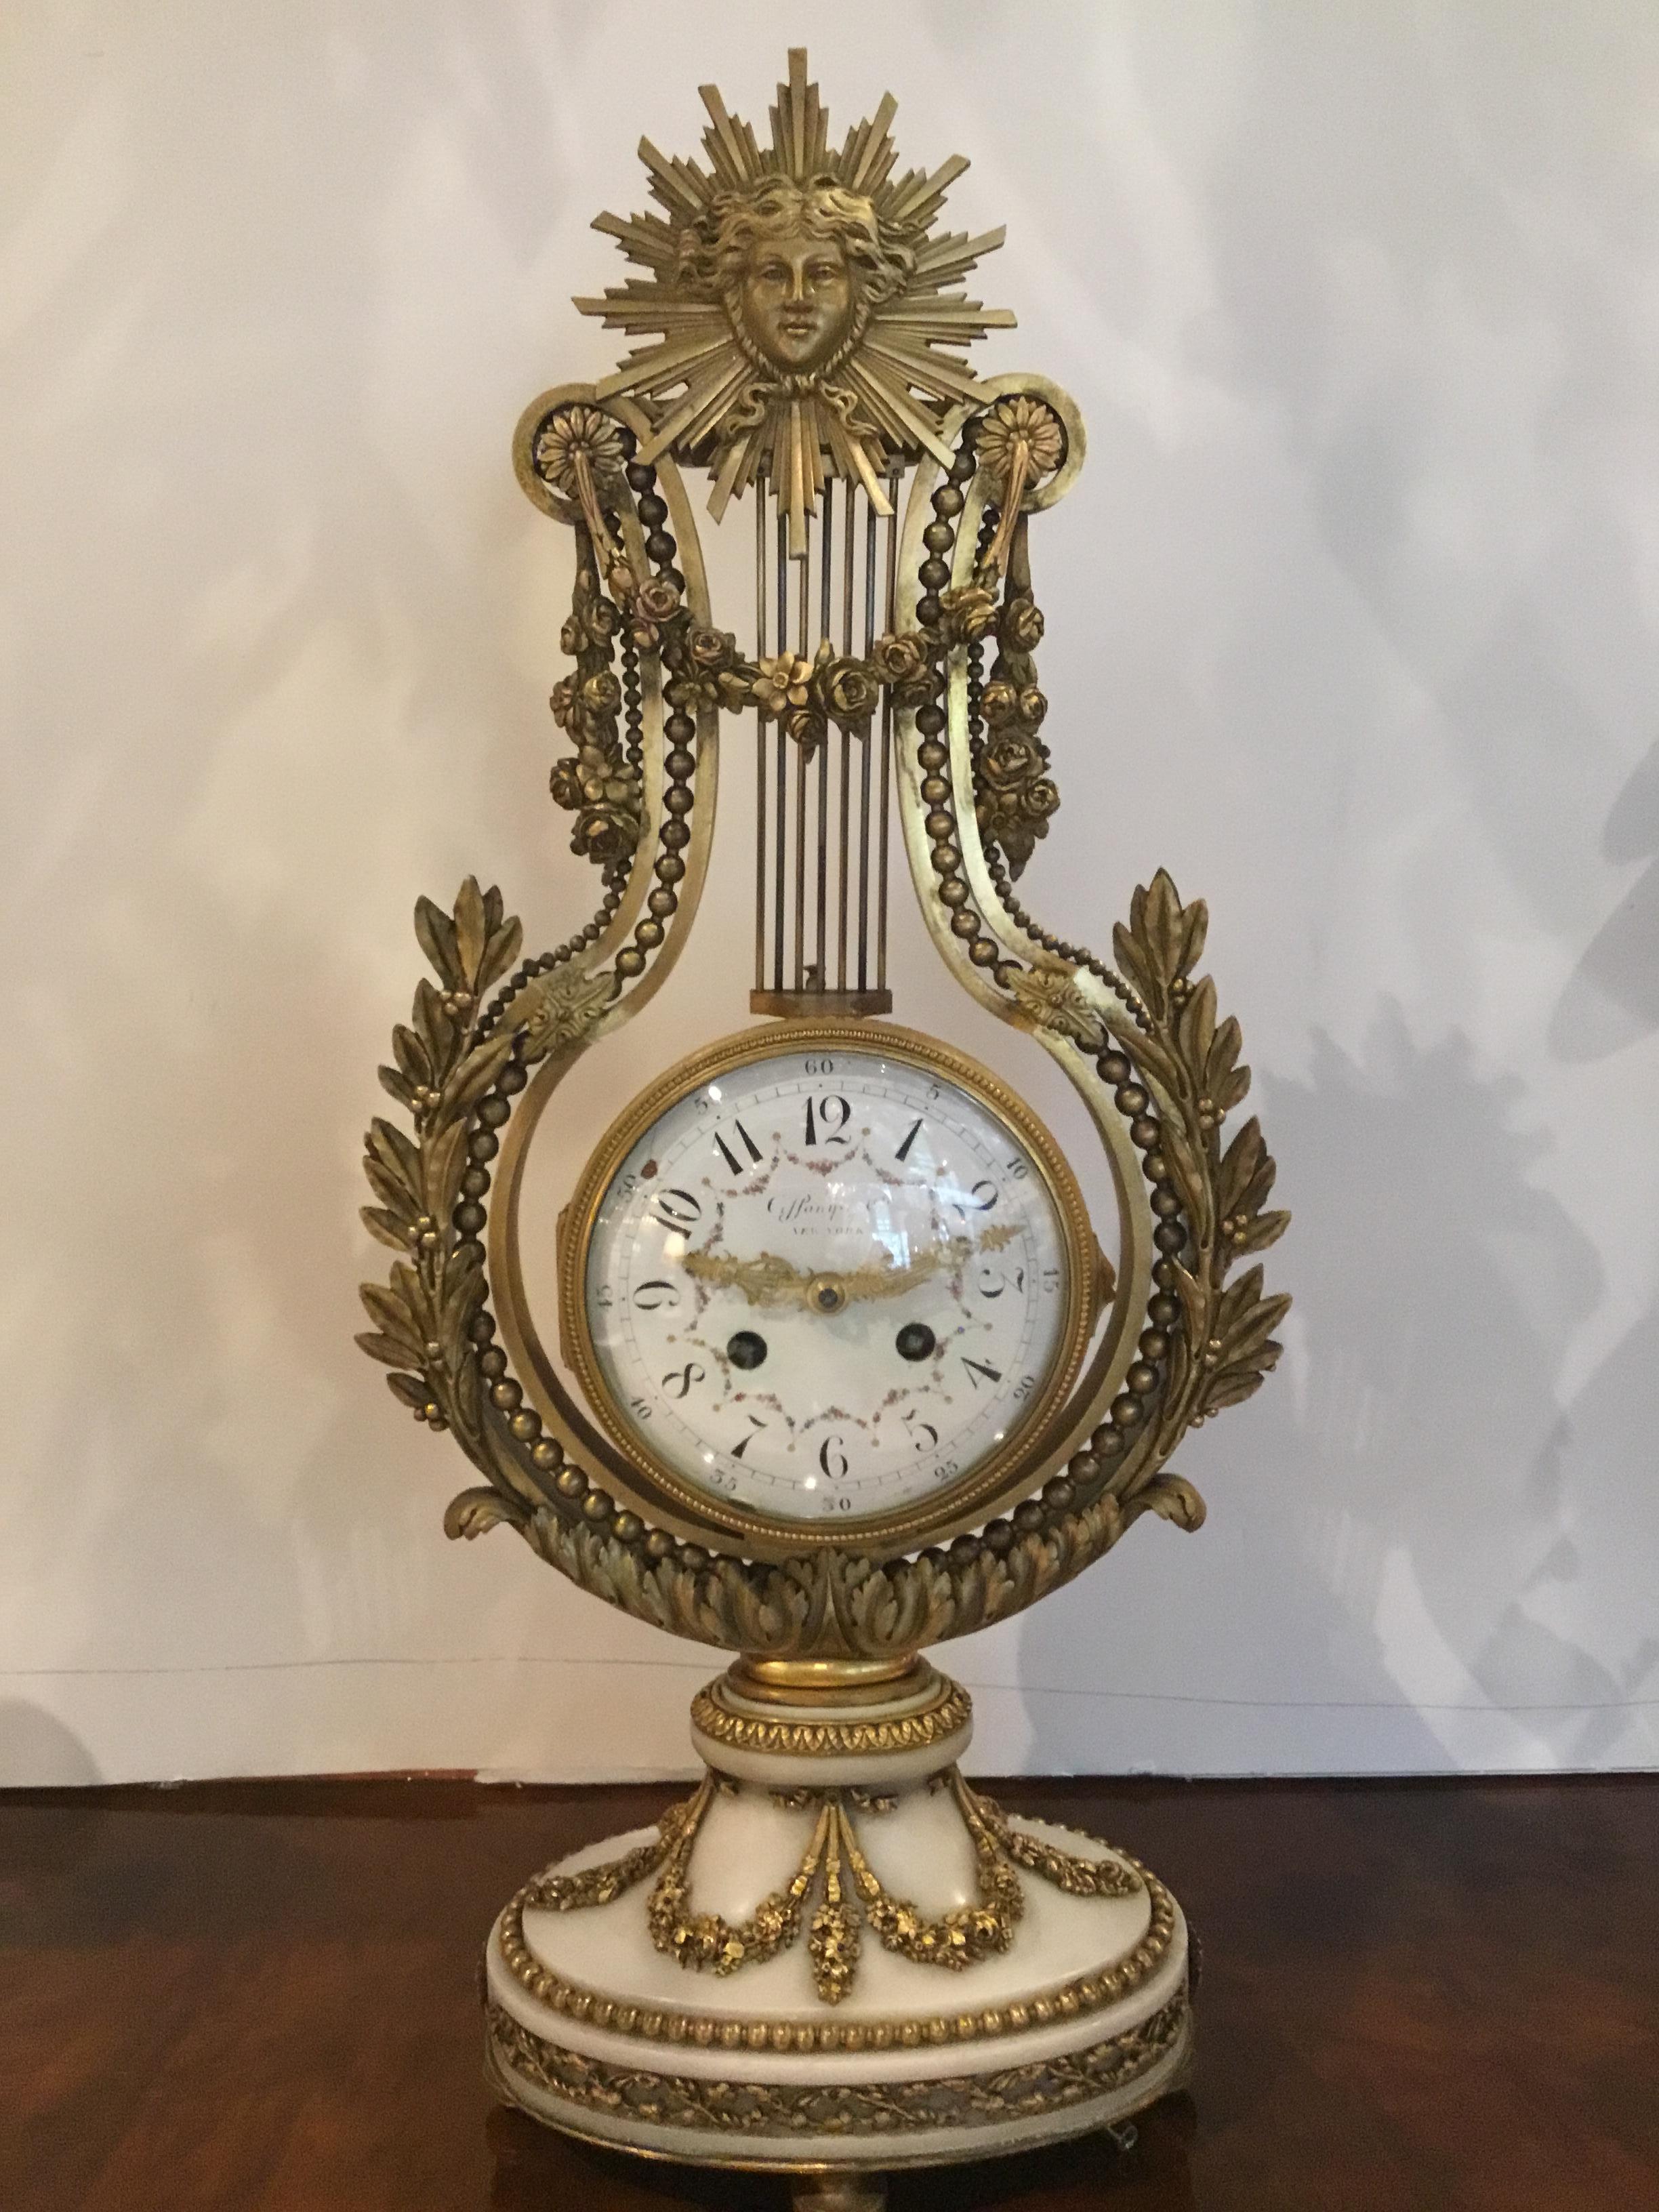 French White marble and bronze dore garniture set made for G J Payne
Co. New York, crafted by a Paris clock maker, 19th century. Set is comprised of
A clock with a gilt bronze mask draped with festoon swags. A lyre form frame
Surrounds the